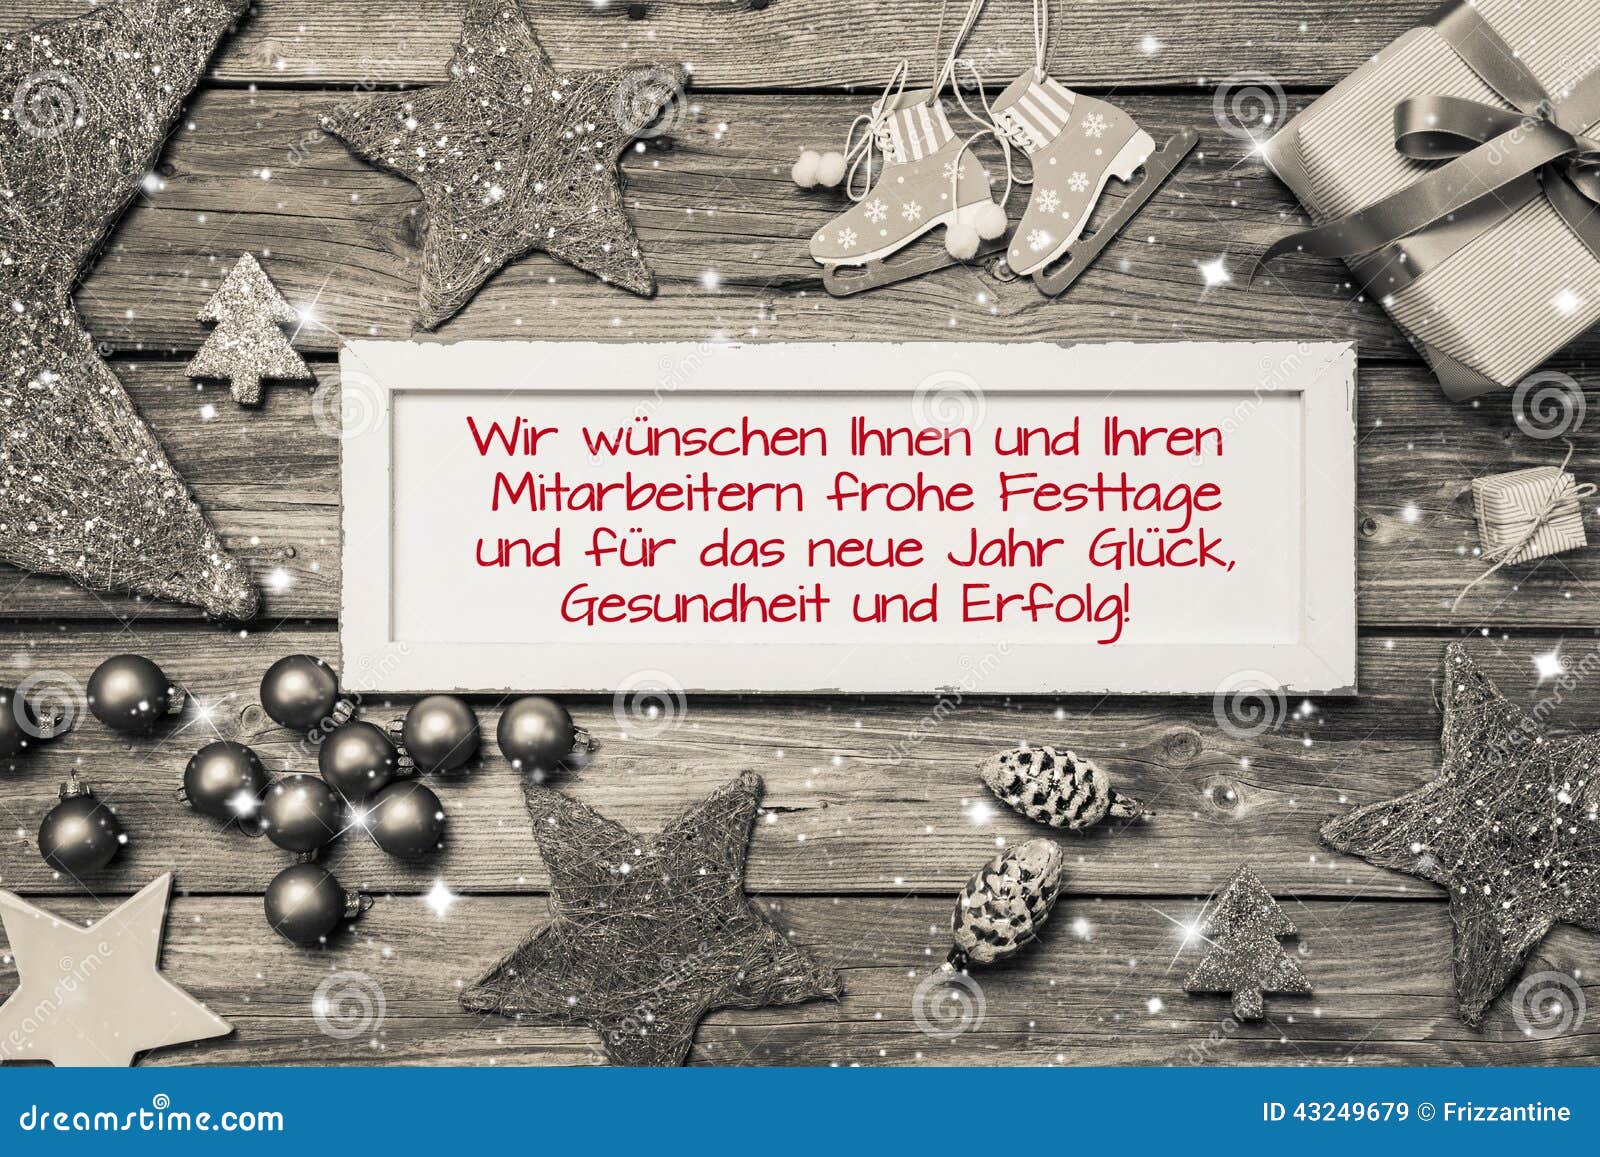 Greeting Card For Christmas With German Text For Merry 